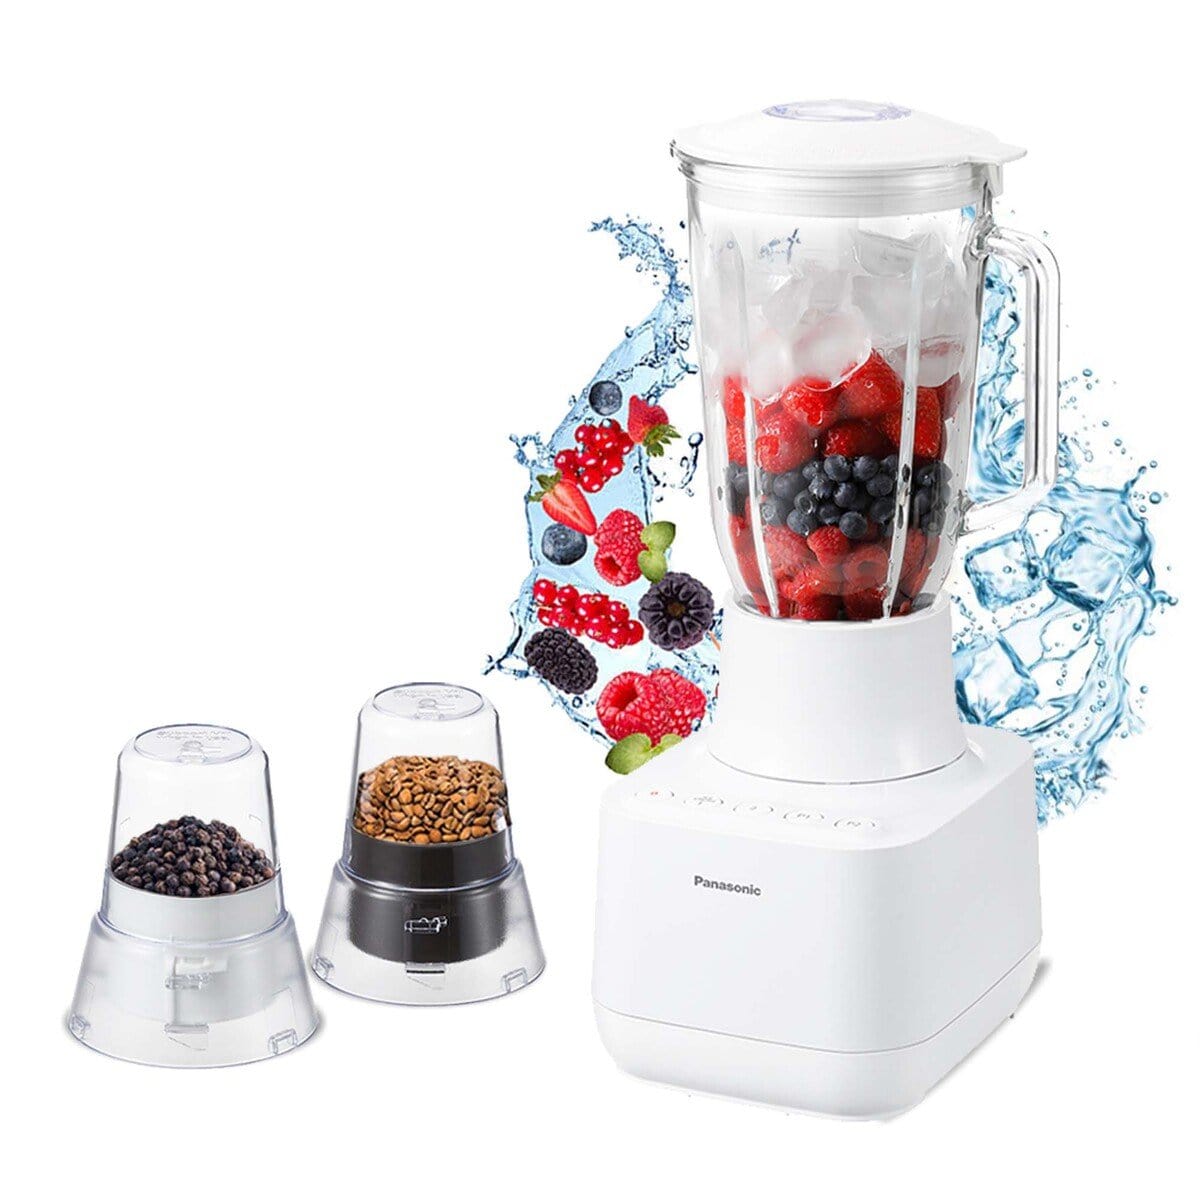 Panasonic 2L Stand Blender 700W - MX-MG5321 | supply Master Accra, Ghana Kitchen Appliances Buy Tools hardware Building materials